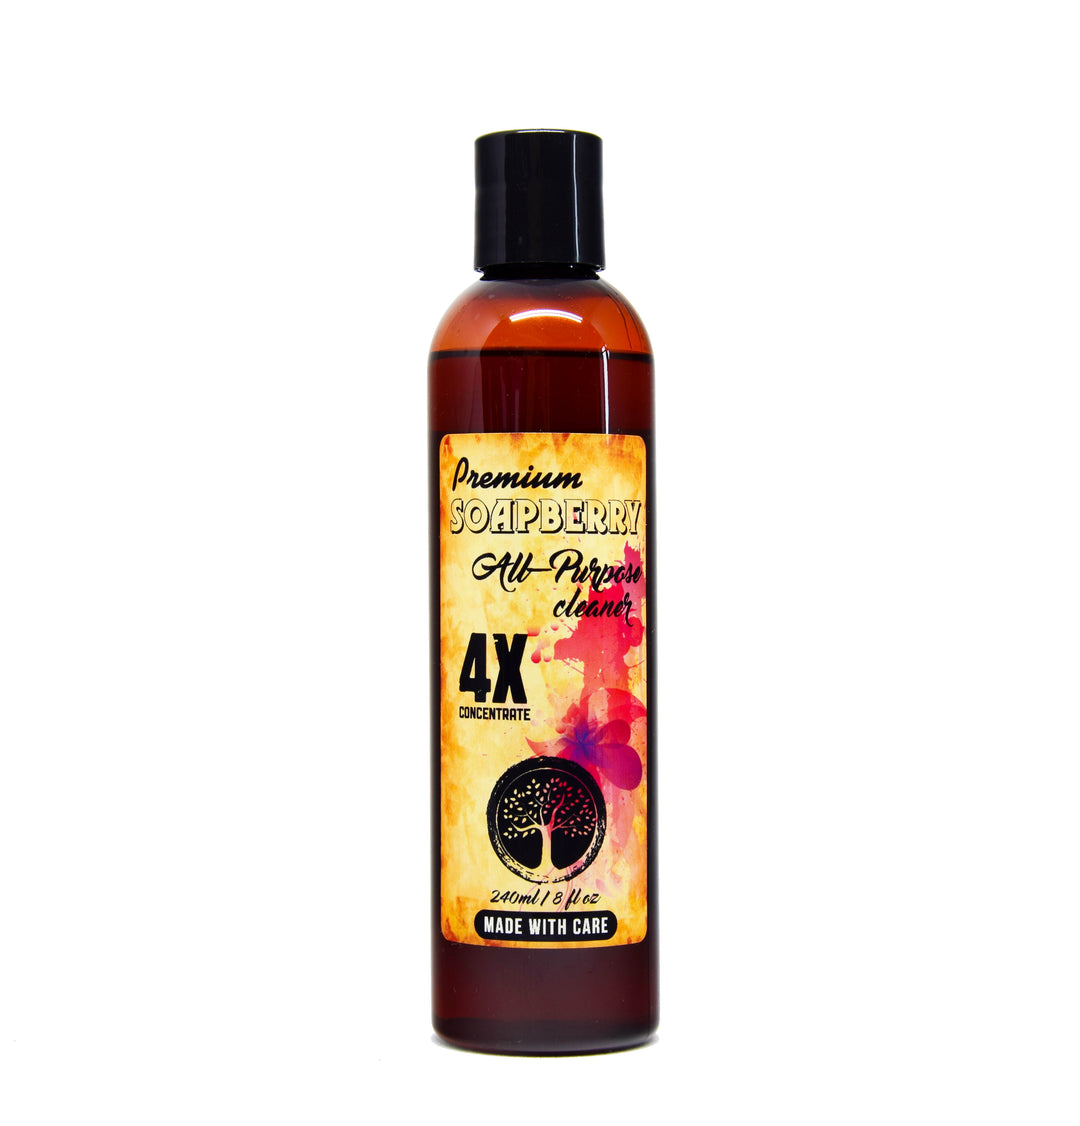 All Natural Soapberry Cleaner - All-Purpose